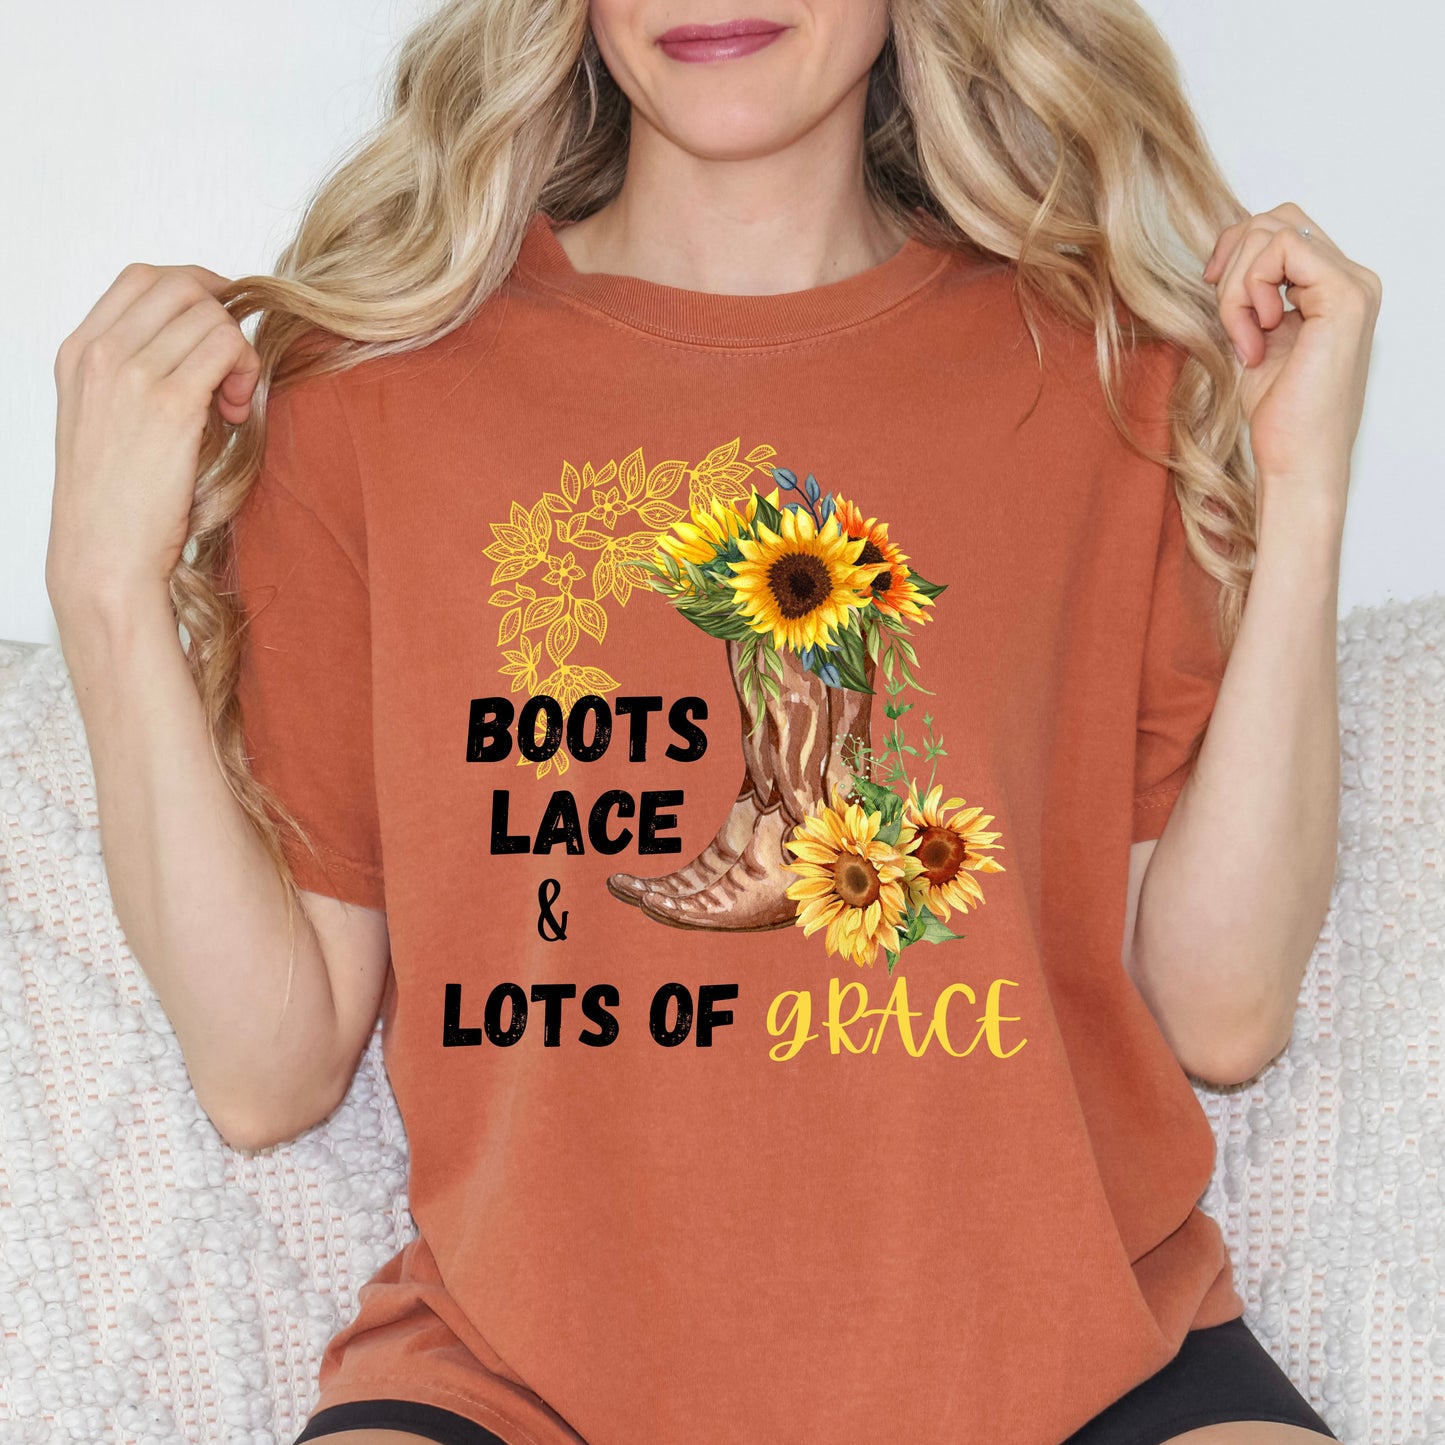 Boots Lace and Lots of Grace:  Comfort Colors Garment-Dyed T-shirt